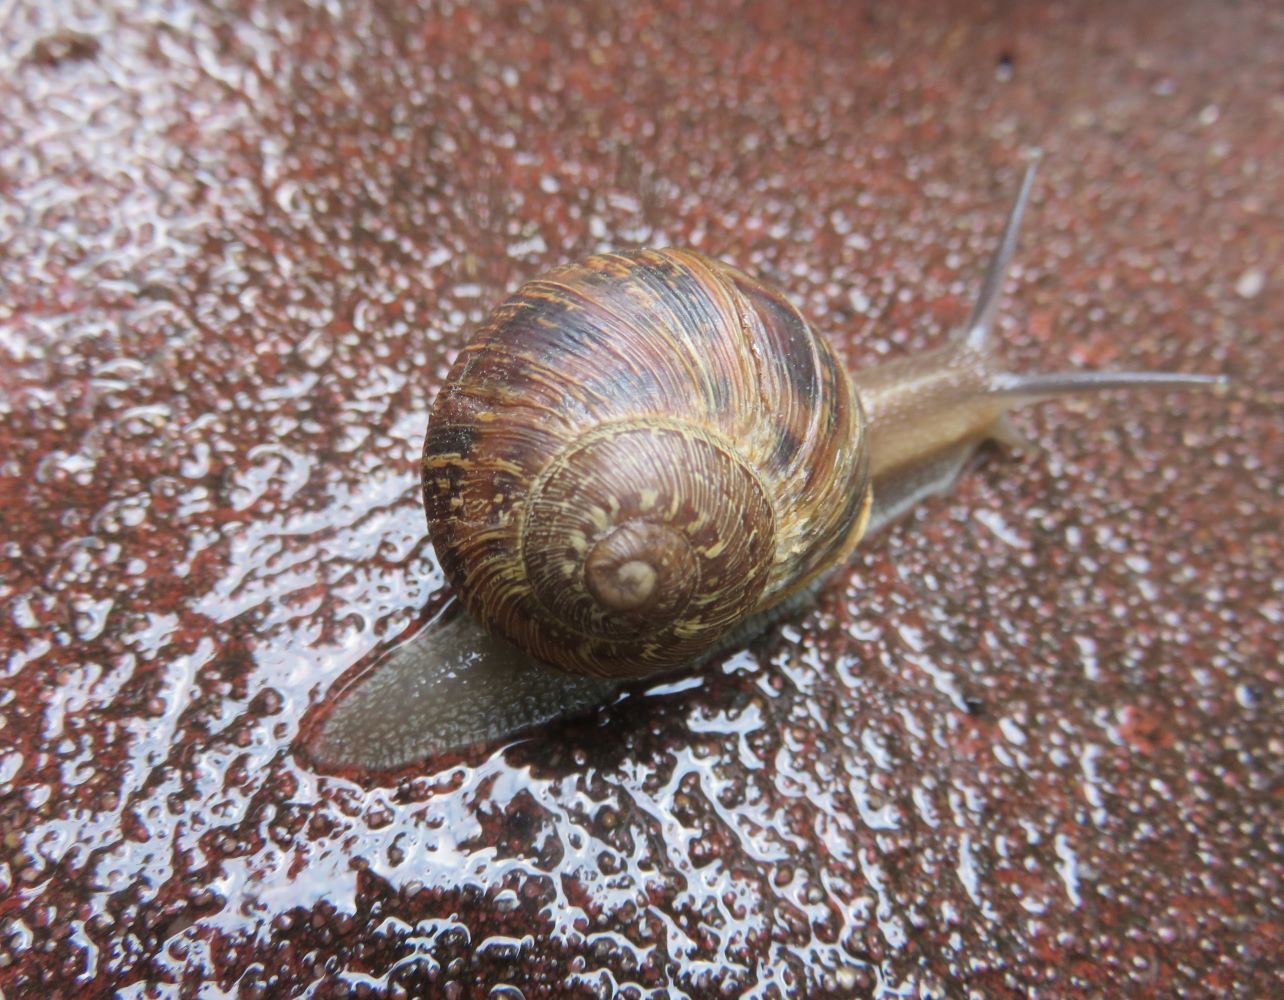 When snails move on a wet surfaces it prevents desiccation and damage to their soft foot